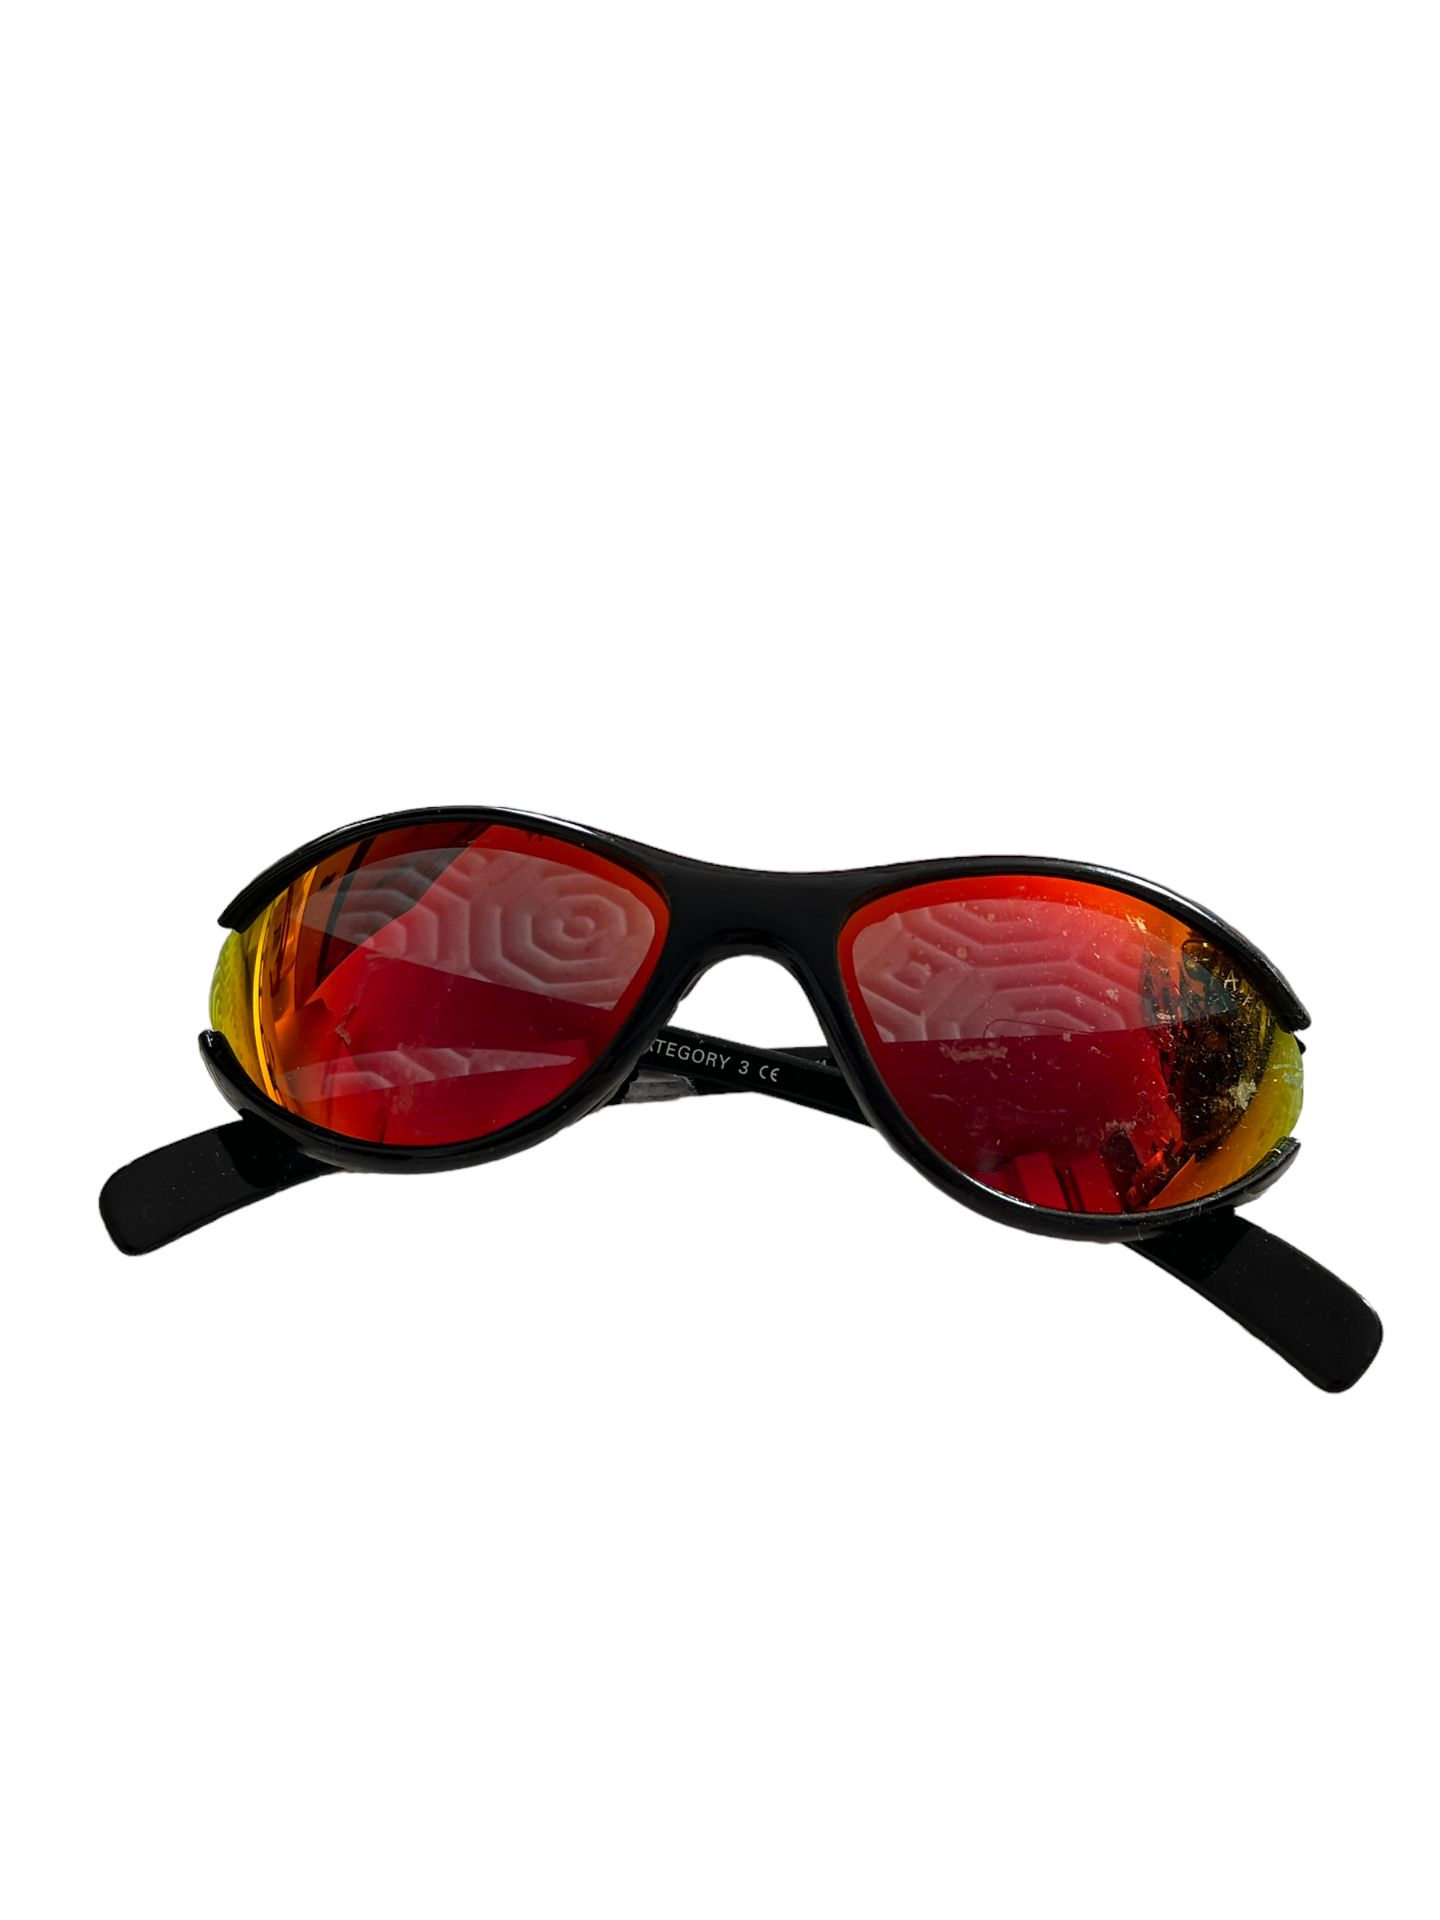 Apex Glasses with case RR£38.00 surplus stock - Image 2 of 4